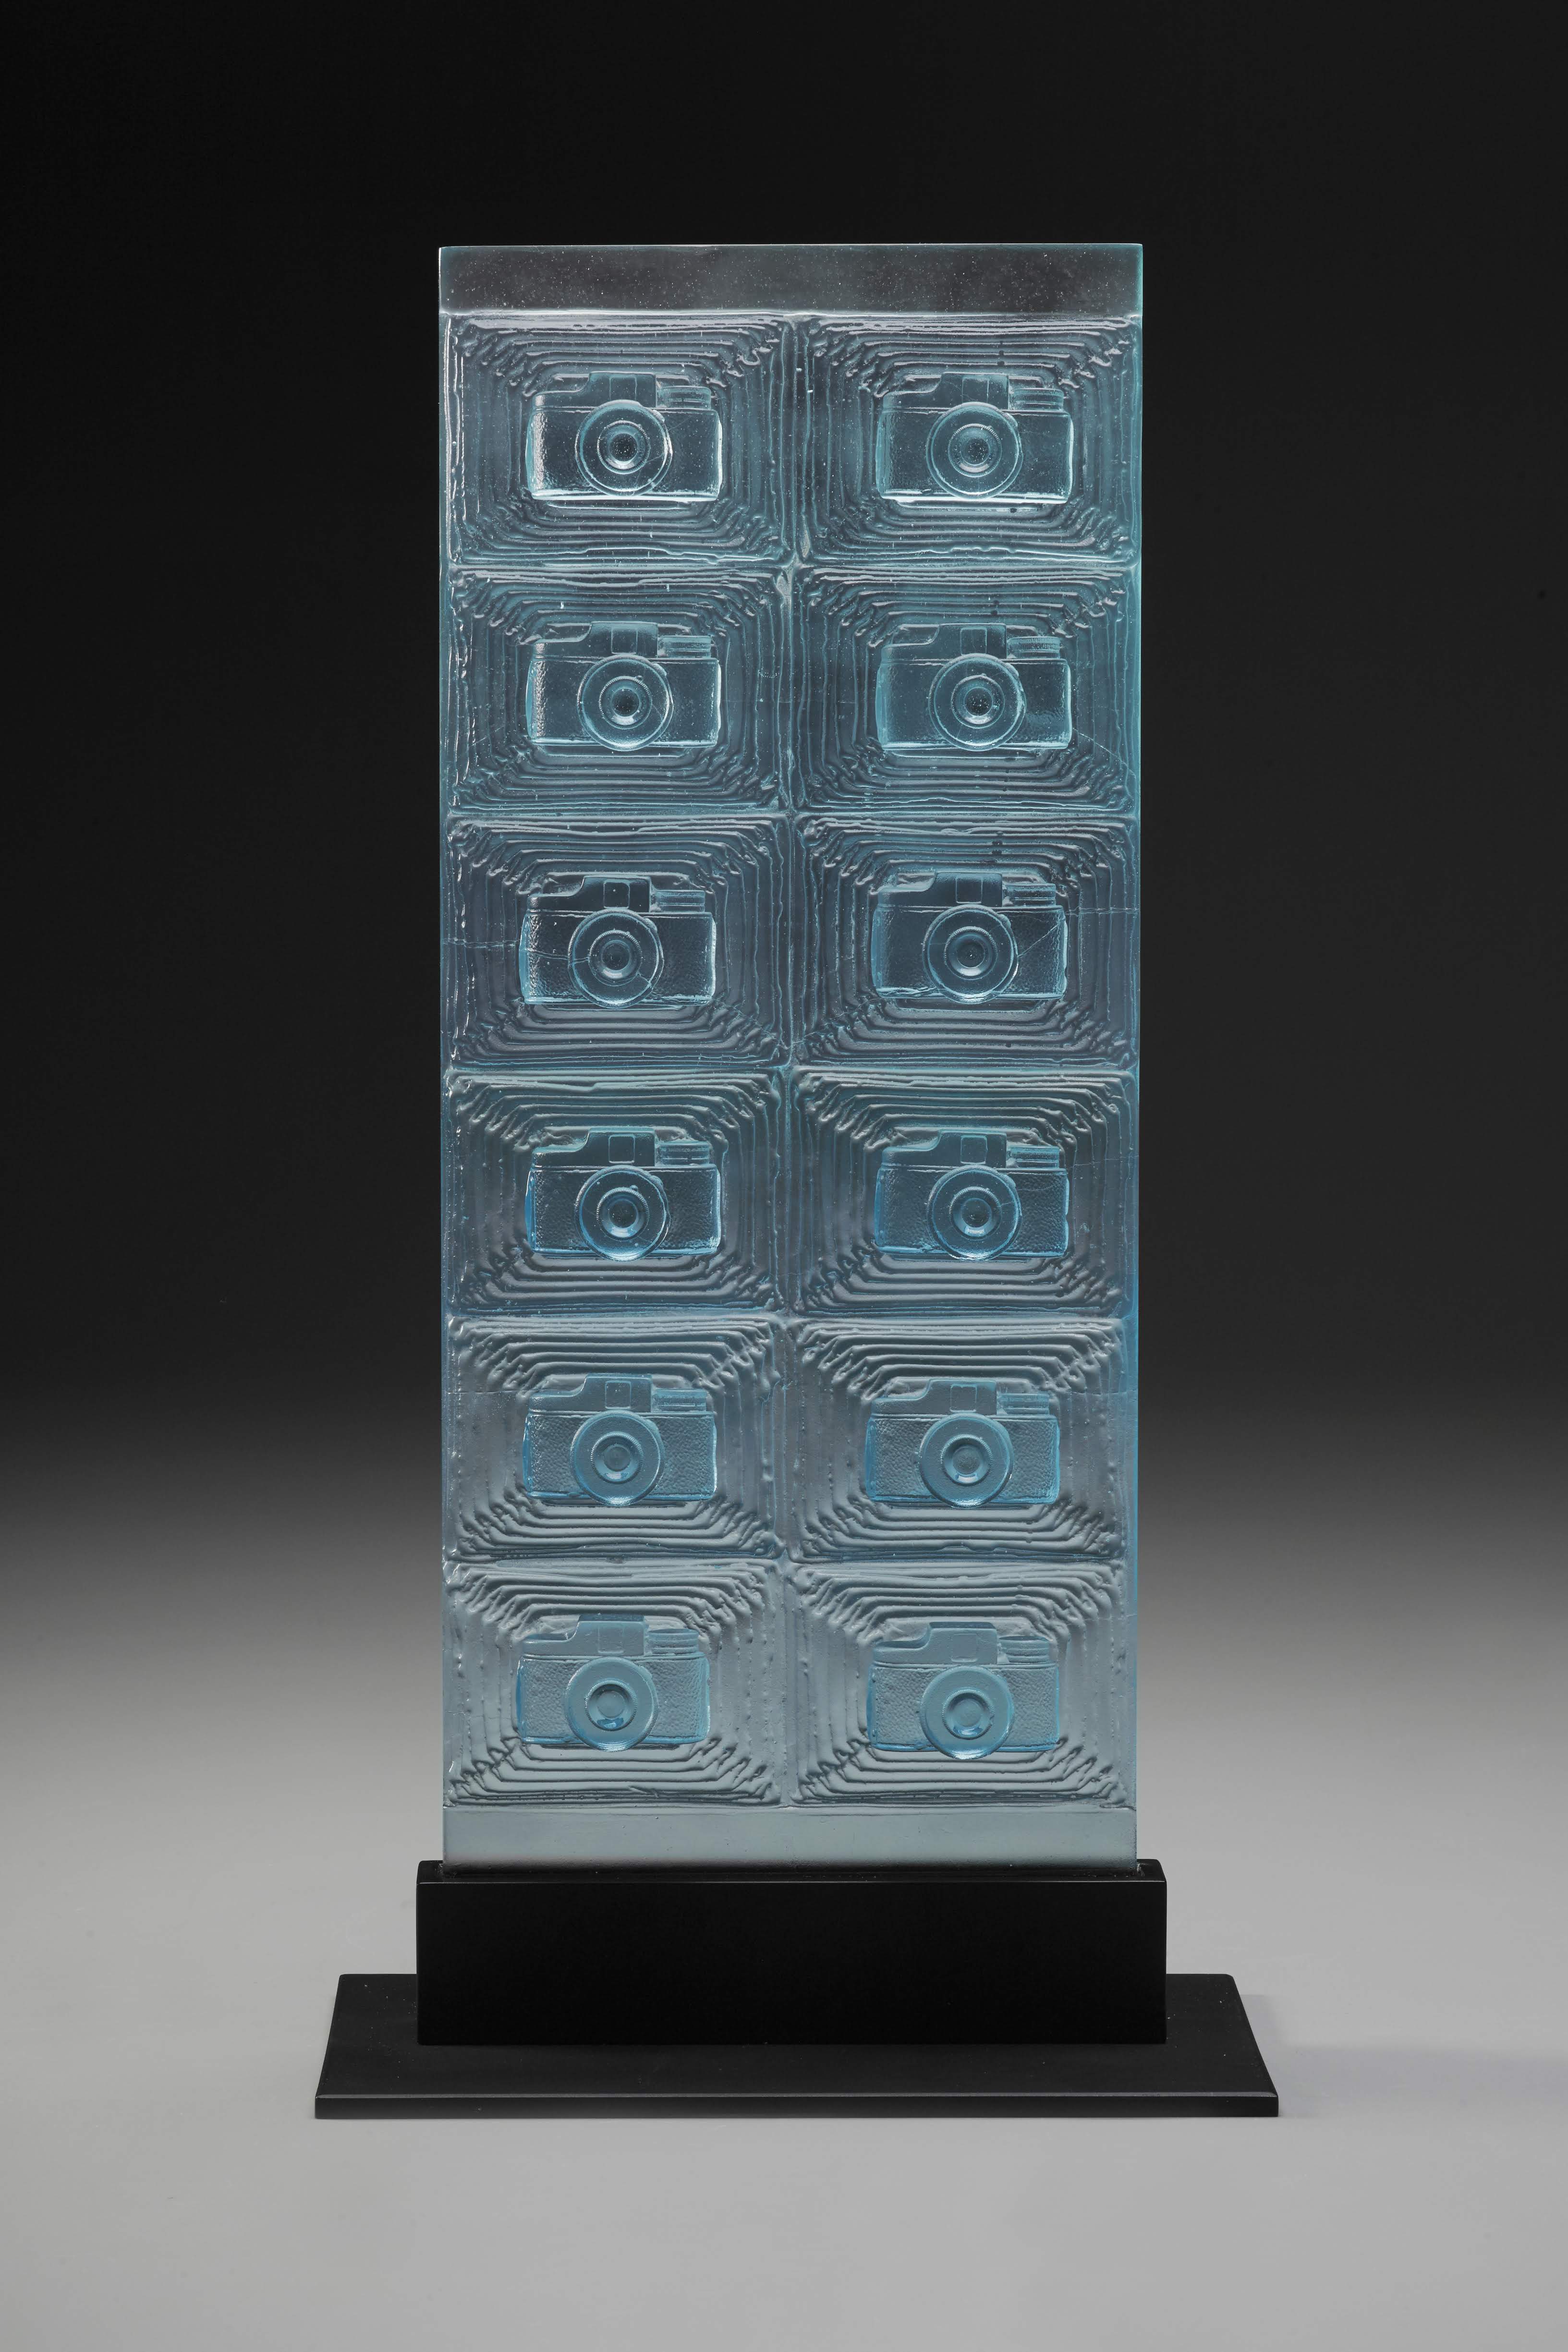 Title: "12 Observers" Method: Cast glass, etched, coldworked Material: Glass, metal Size: 20" X 10" X 6" Date: 2018 PHOTO: John Mueller